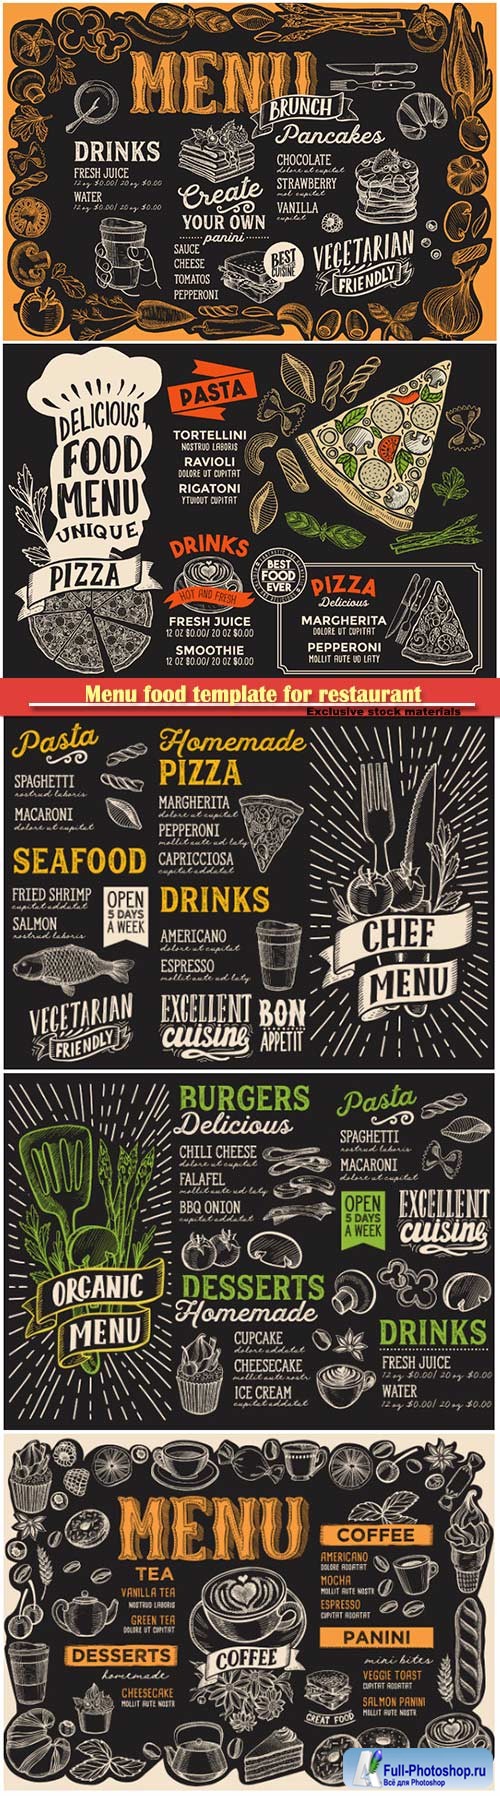 Menu food template for restaurant with hand-drawn graphic